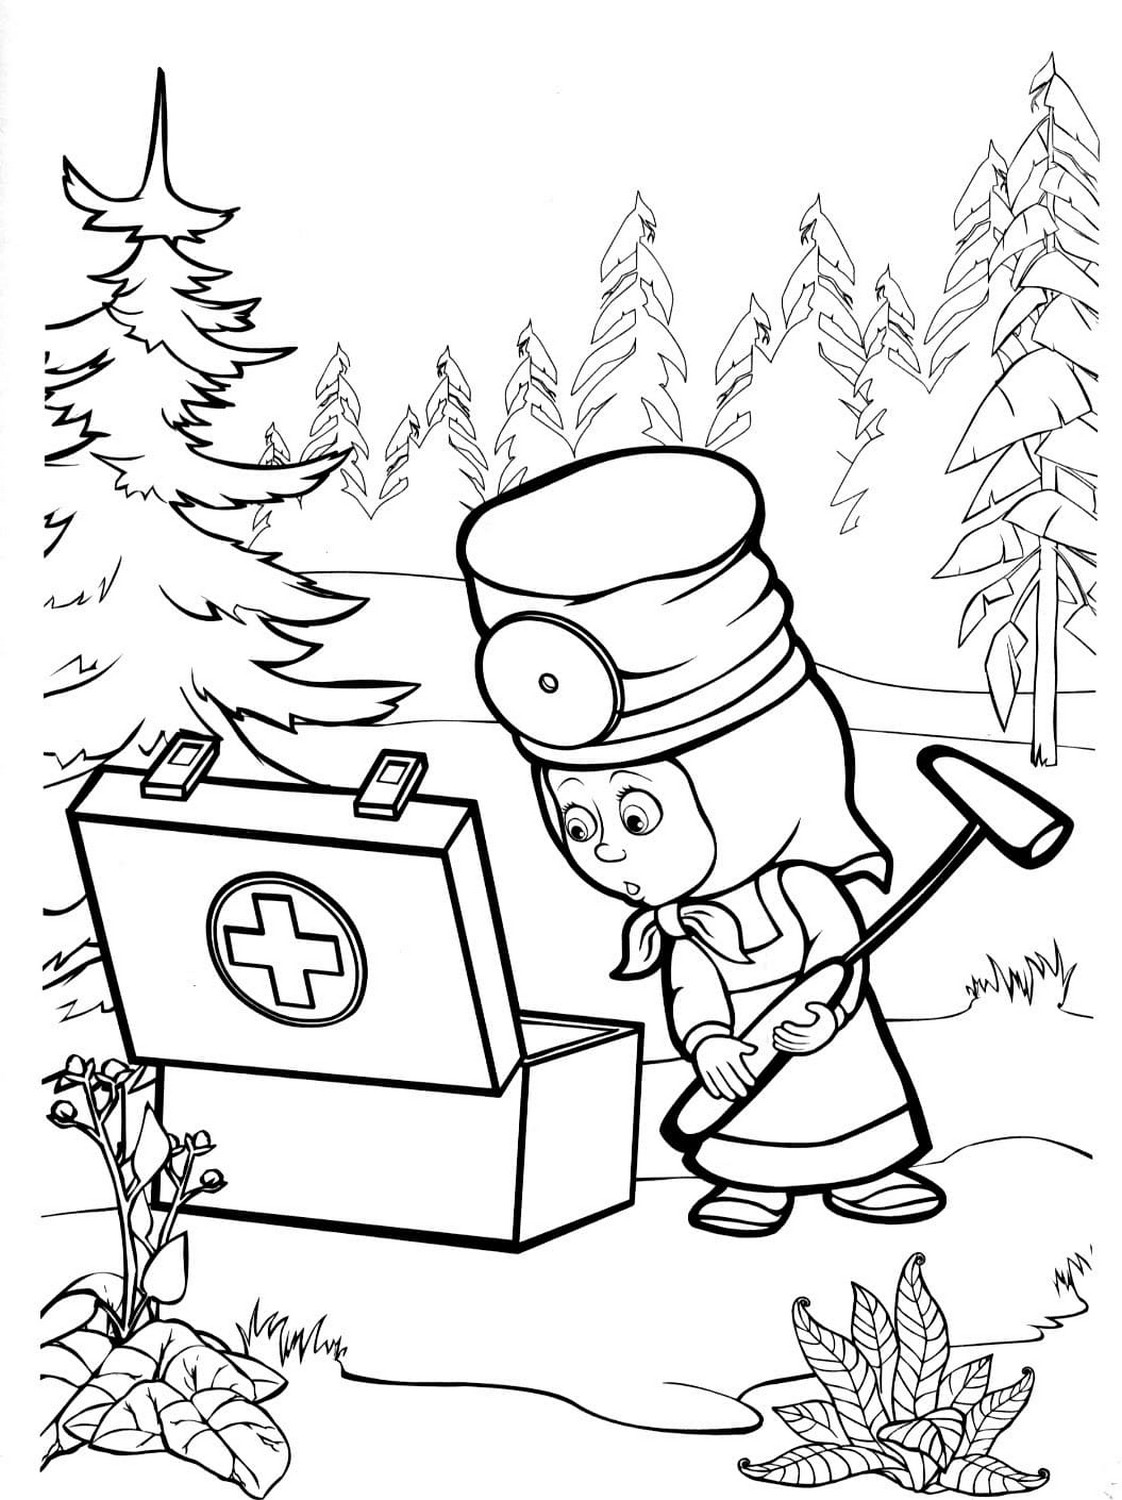 Masha and the Bear 61  coloring page to print and coloring